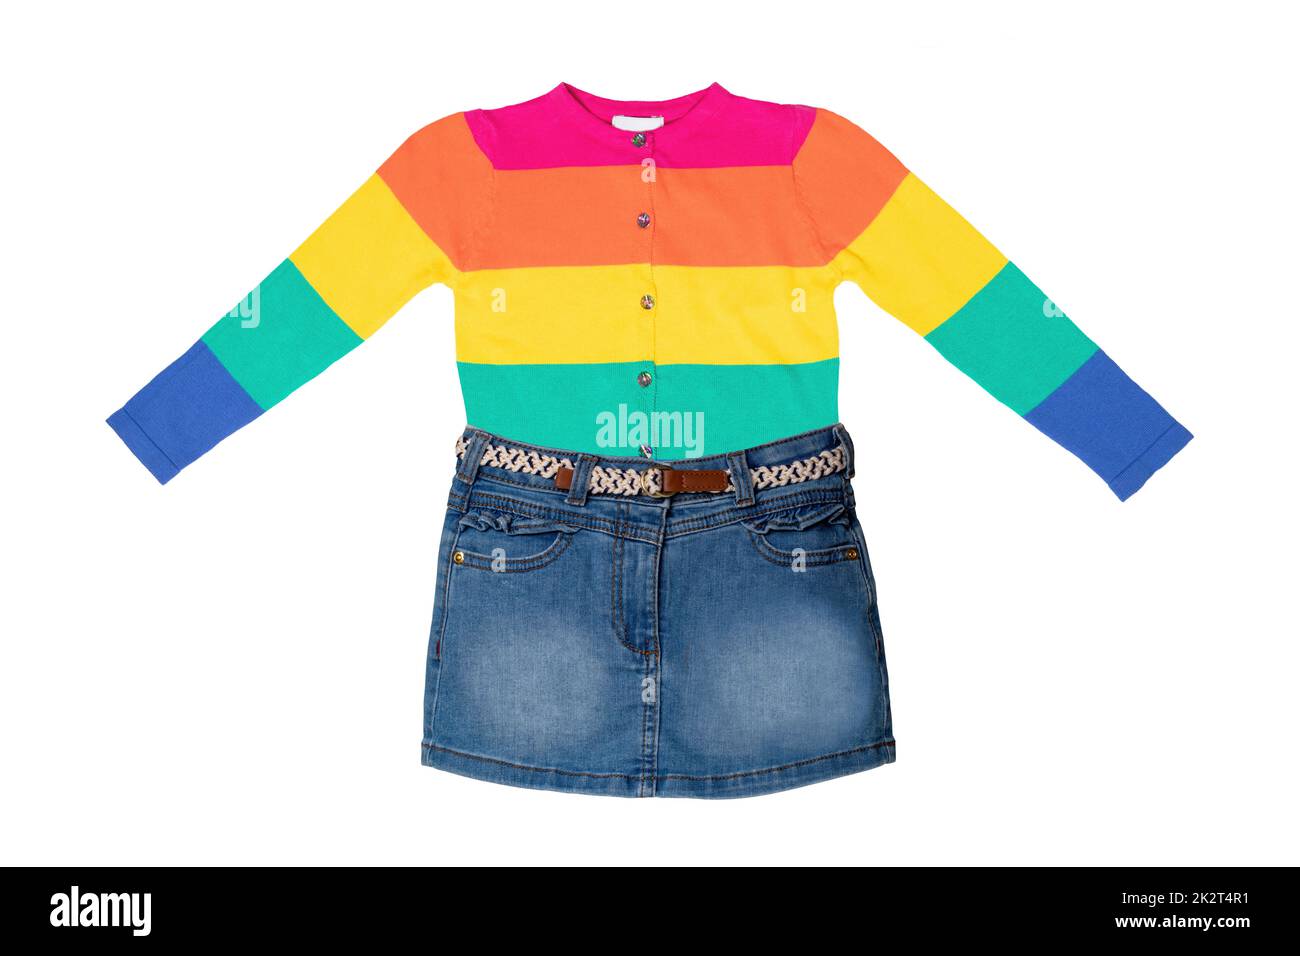 Girls clothing. Beautiful cute blue little kids denim skirt and a fashionable rainbow colored jumper or sweater isolated on a white background. Spring and summer fashion. Stock Photo